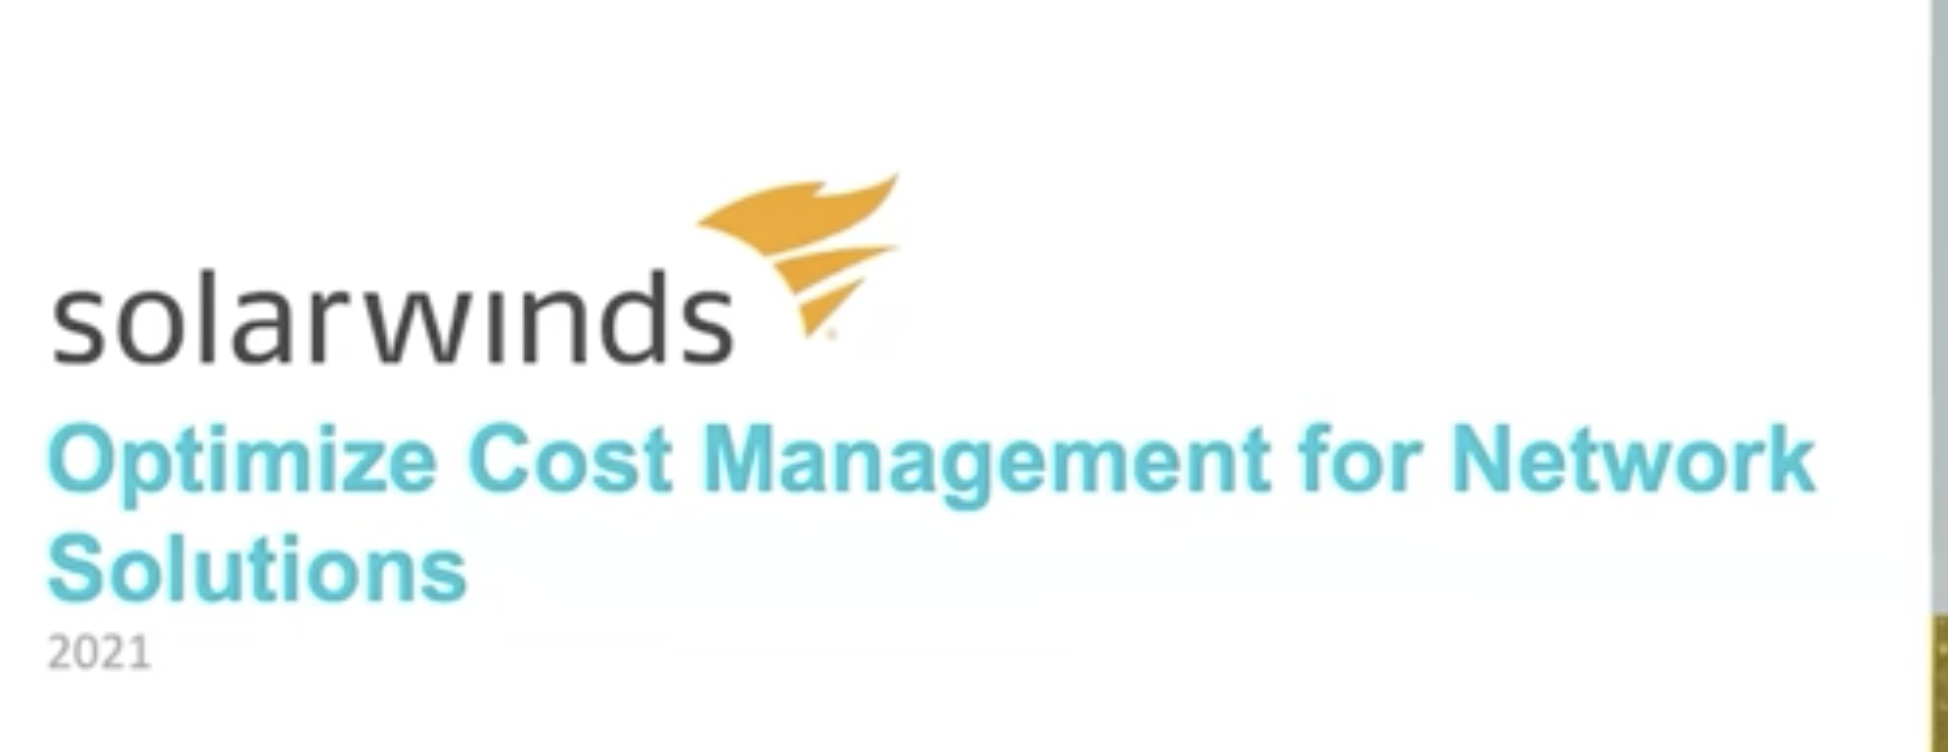 Optimize Cost Management With SolarWinds Network Solutions